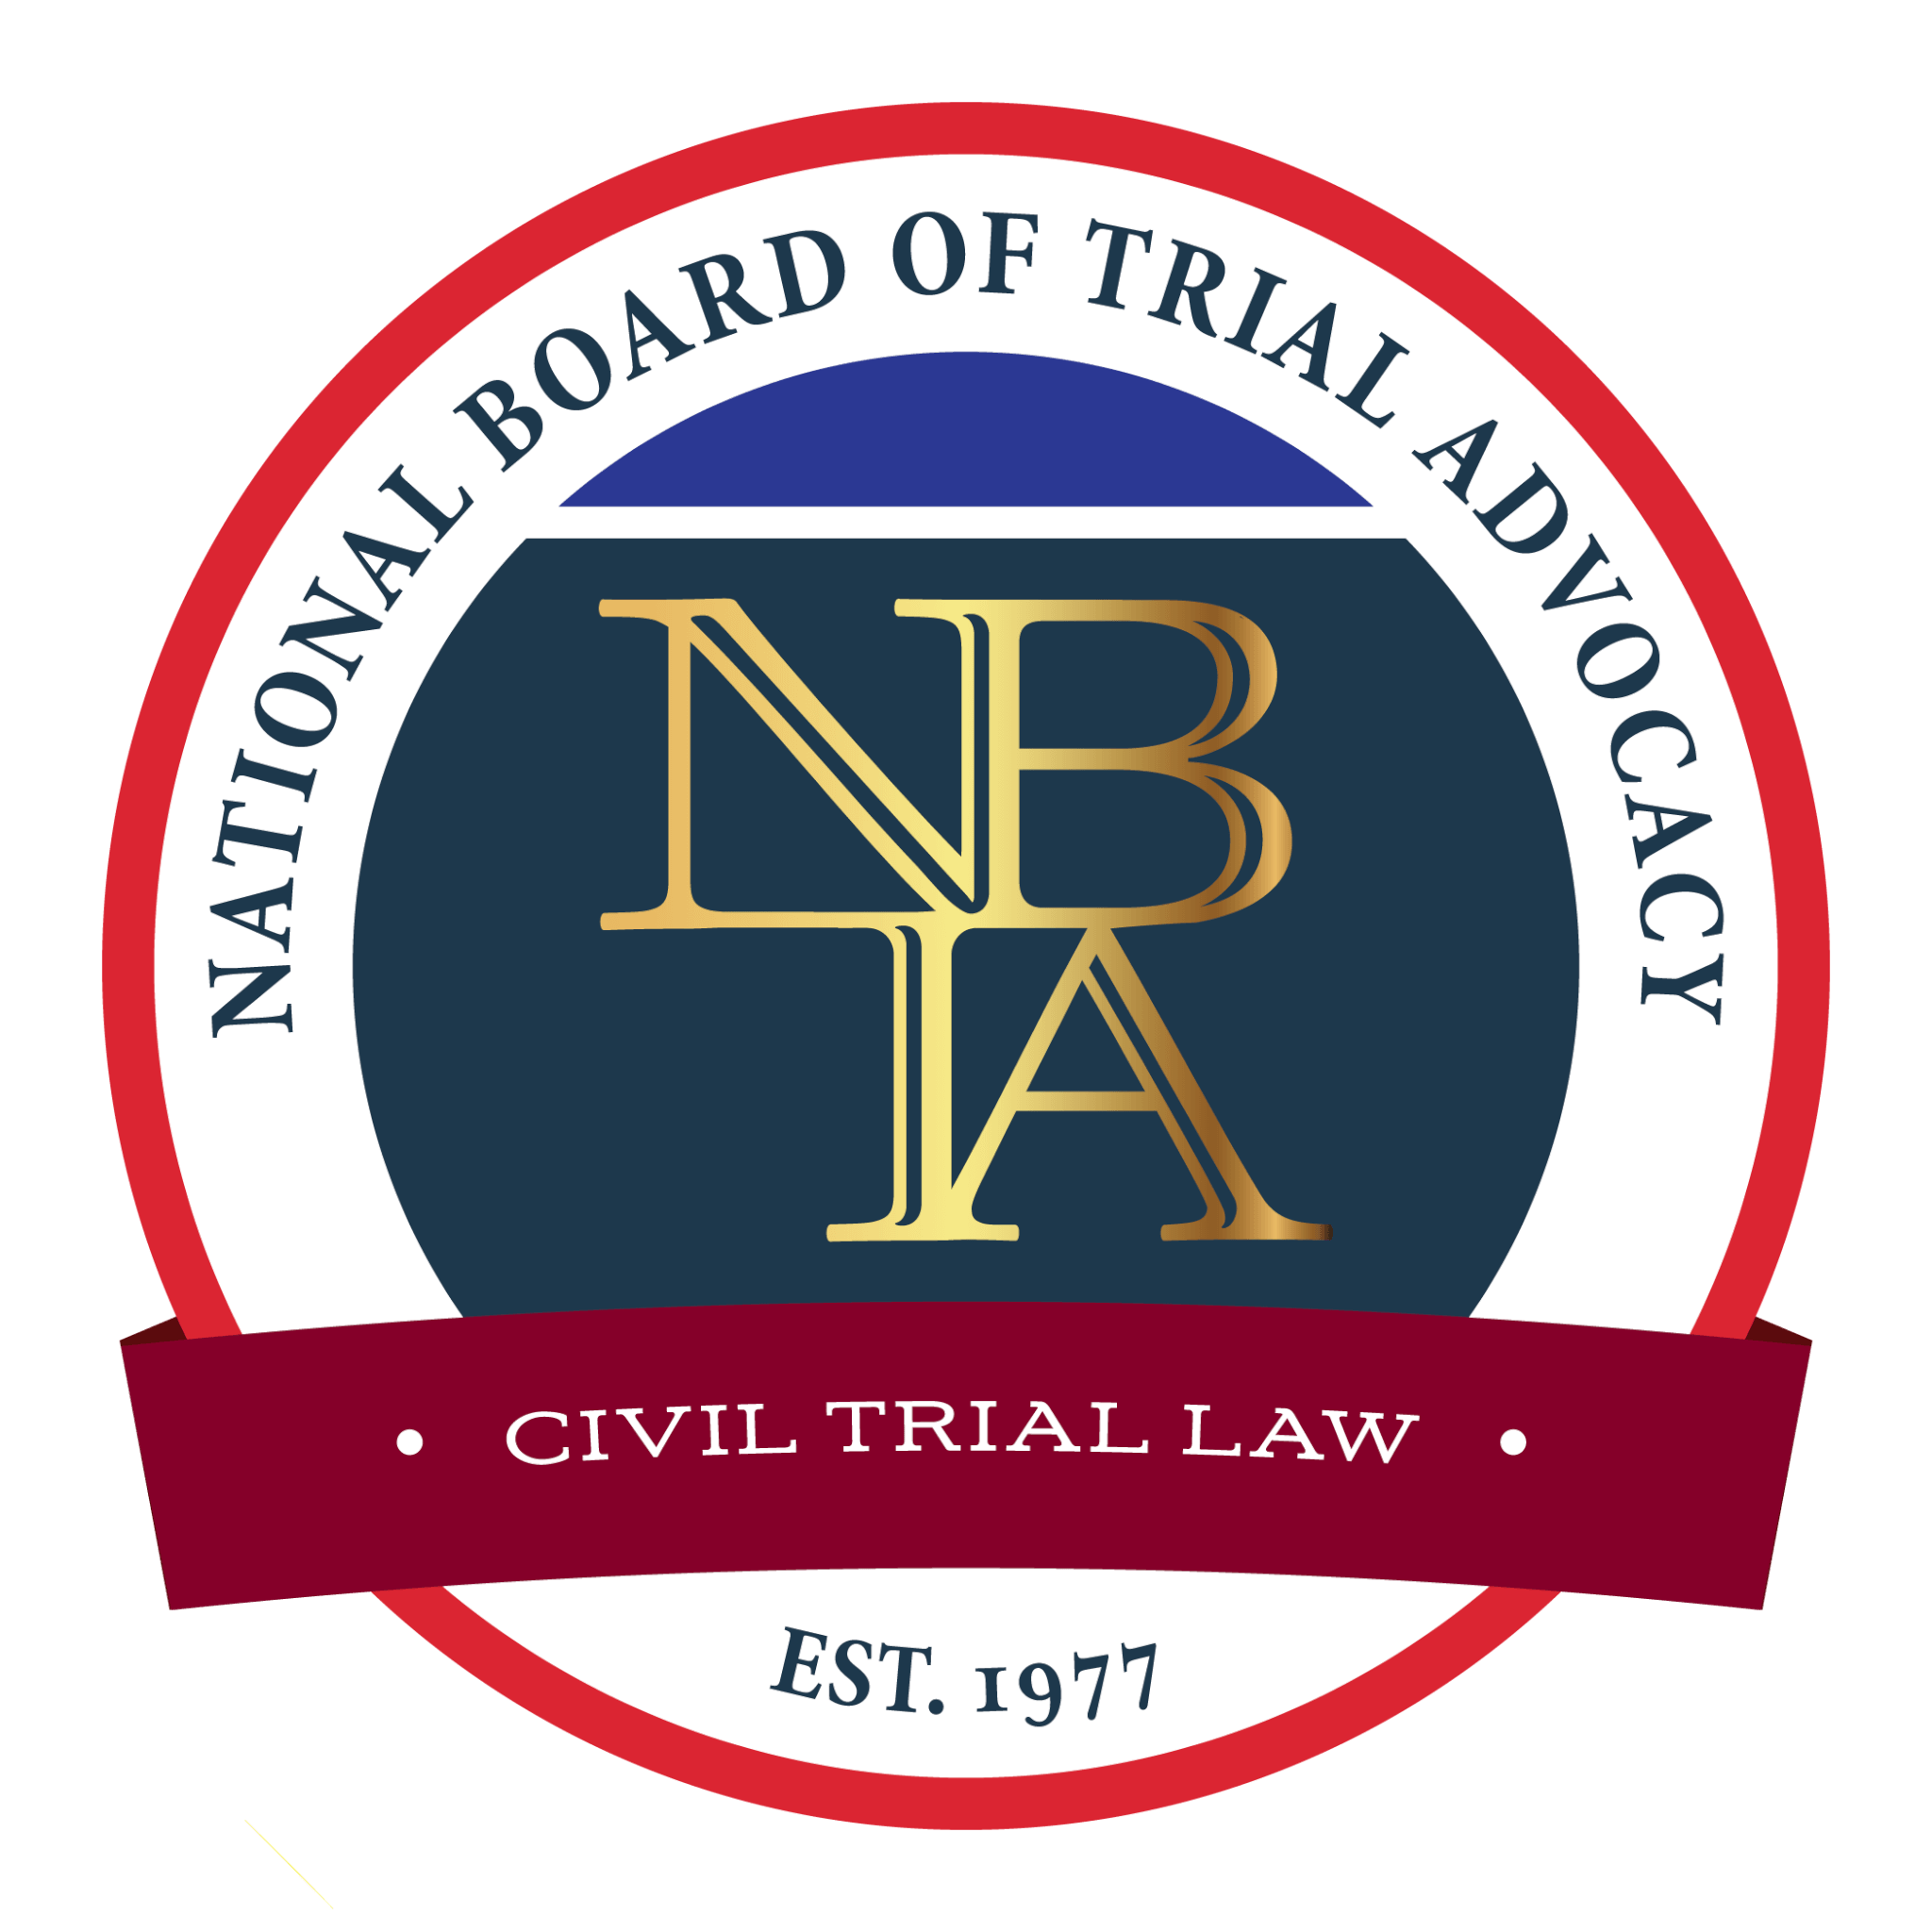 National Board of Trial Advocacy - Best personal injury lawyer - law office - business lawyer – accident lawyer – Steckler Wayne Cherry & Love Law Firm Dallas Waco East TX